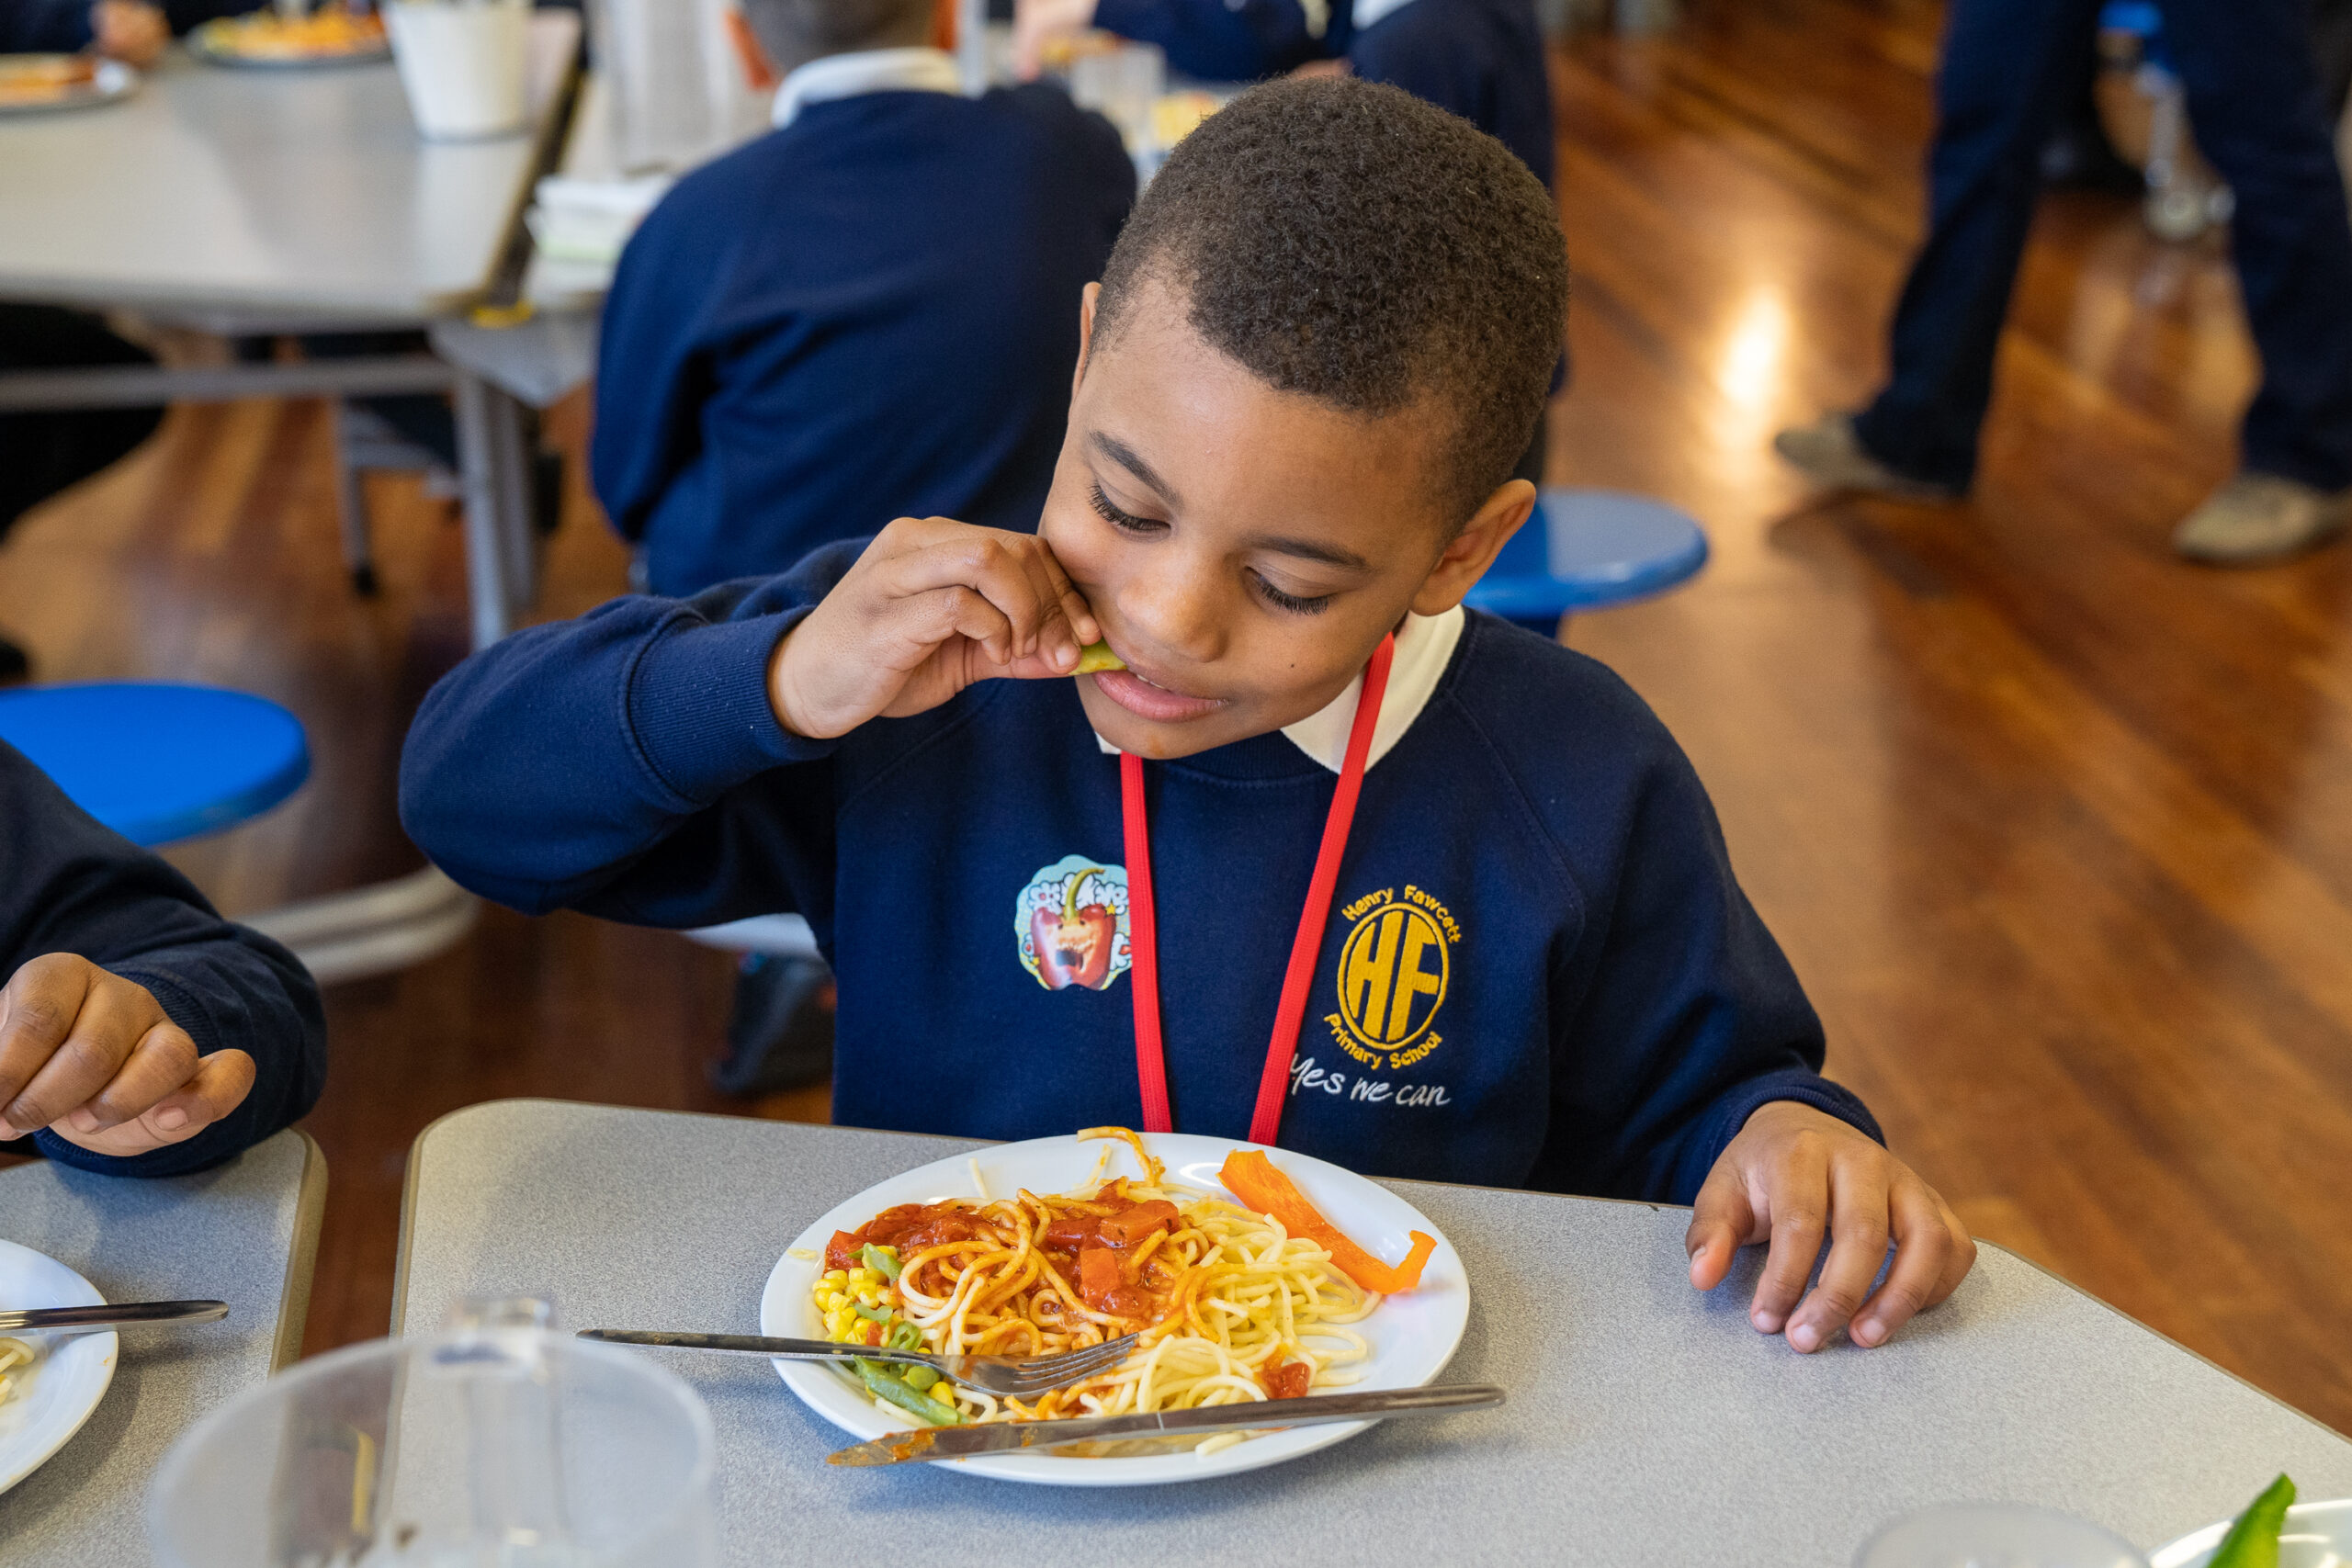 Veg Power UK Campaign at the Henry Fawcett Primary School, South East London, UK- 10 March 2022